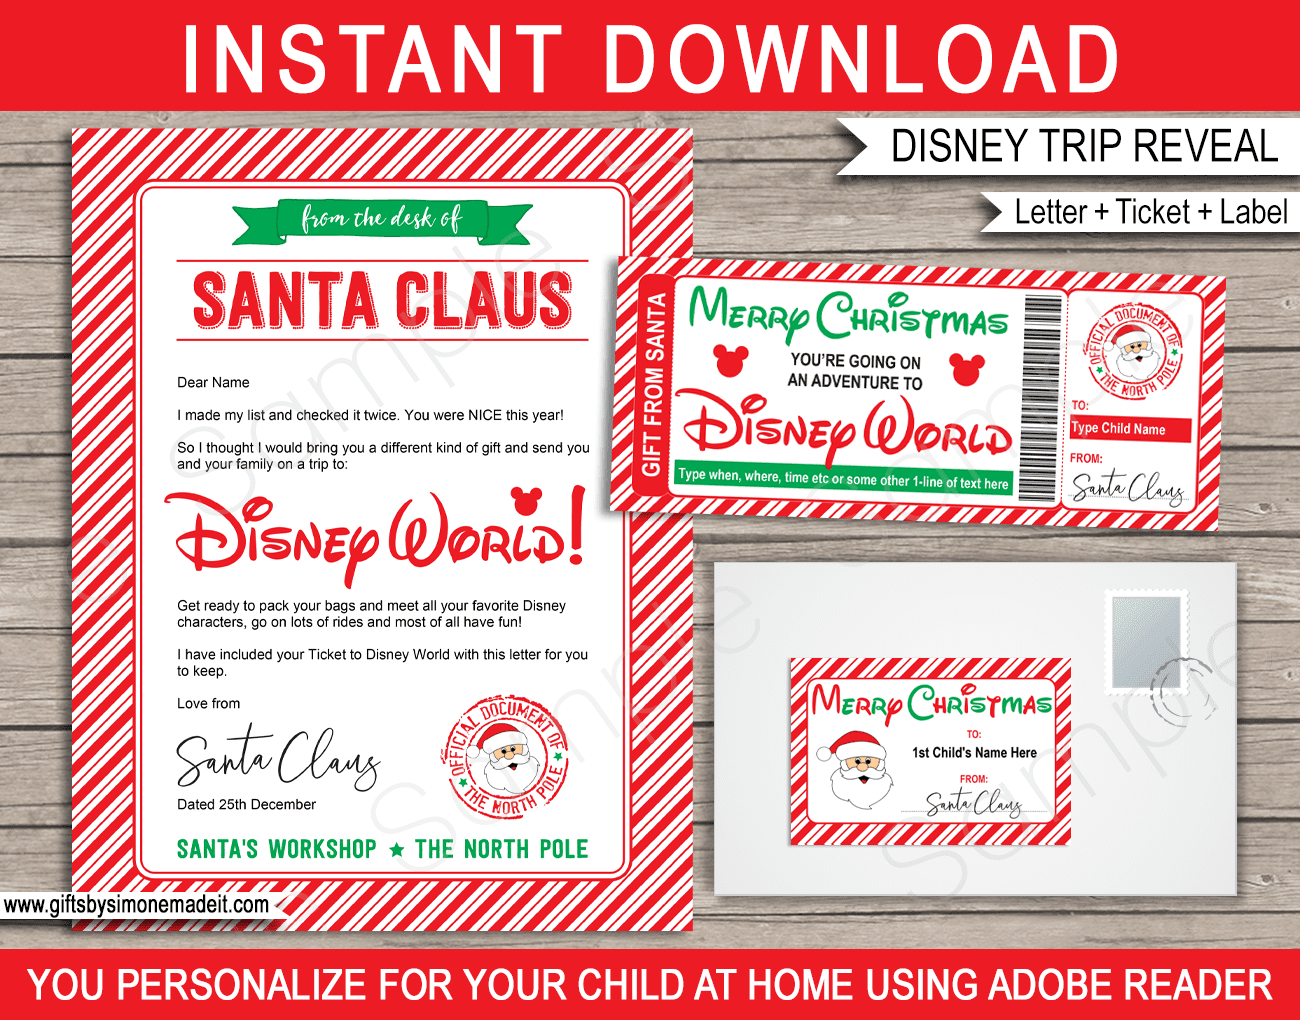 https://www.giftsbysimonemadeit.com/wp-content/uploads/2021/11/Christmas-Disney-World-Trip-Reveal-Letter-Ticket-Label-RED-GREEN.png